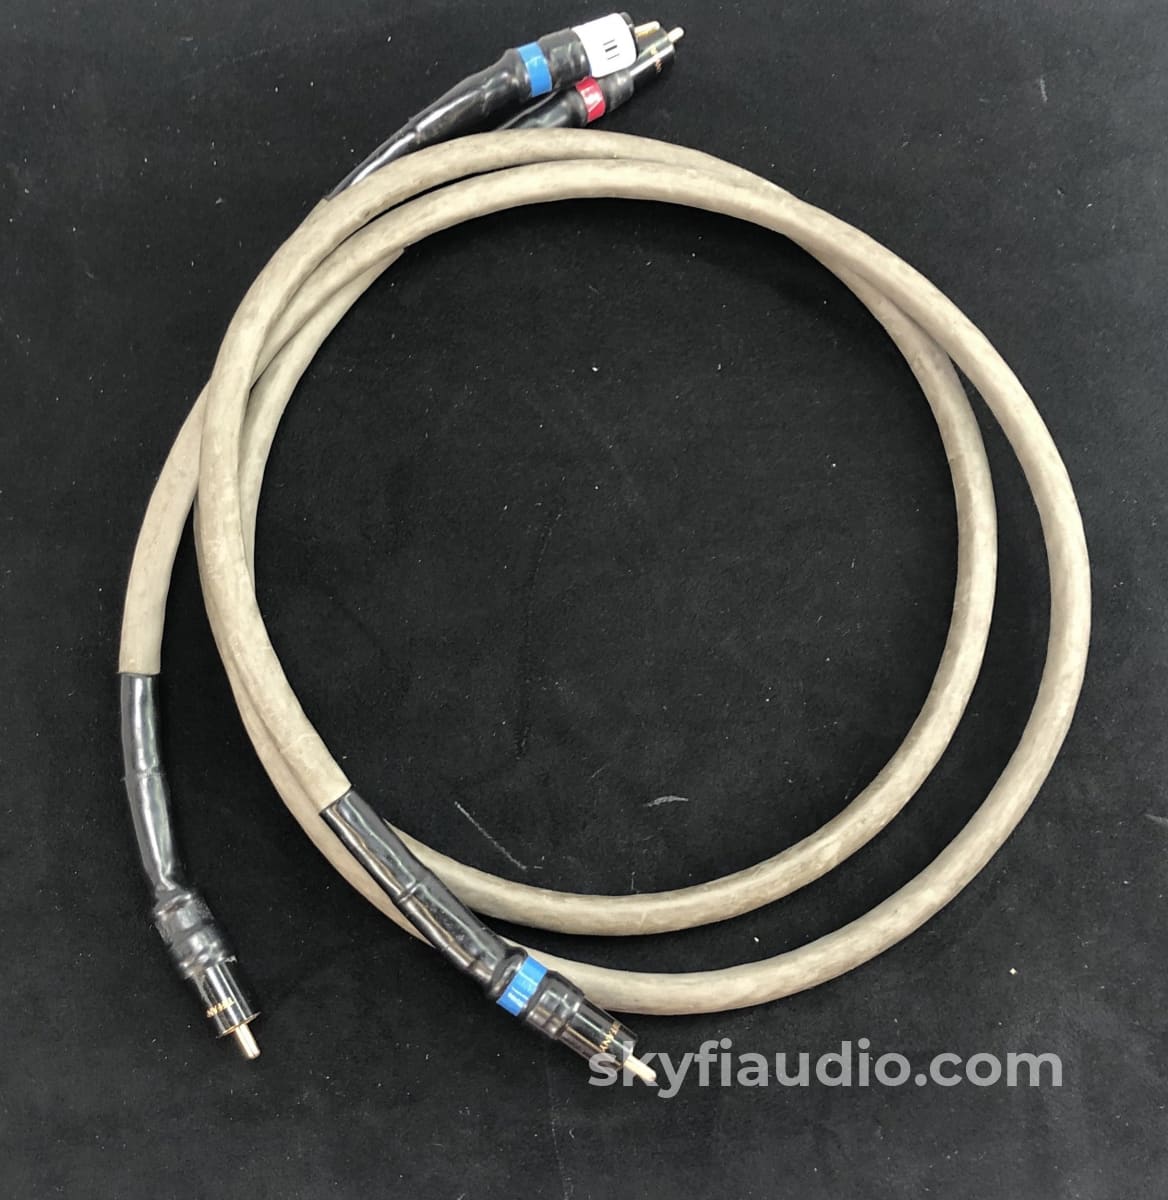 Tiffany Analog Rca Interconnects (Pair) - Super Rare And New Condition 1M Cables